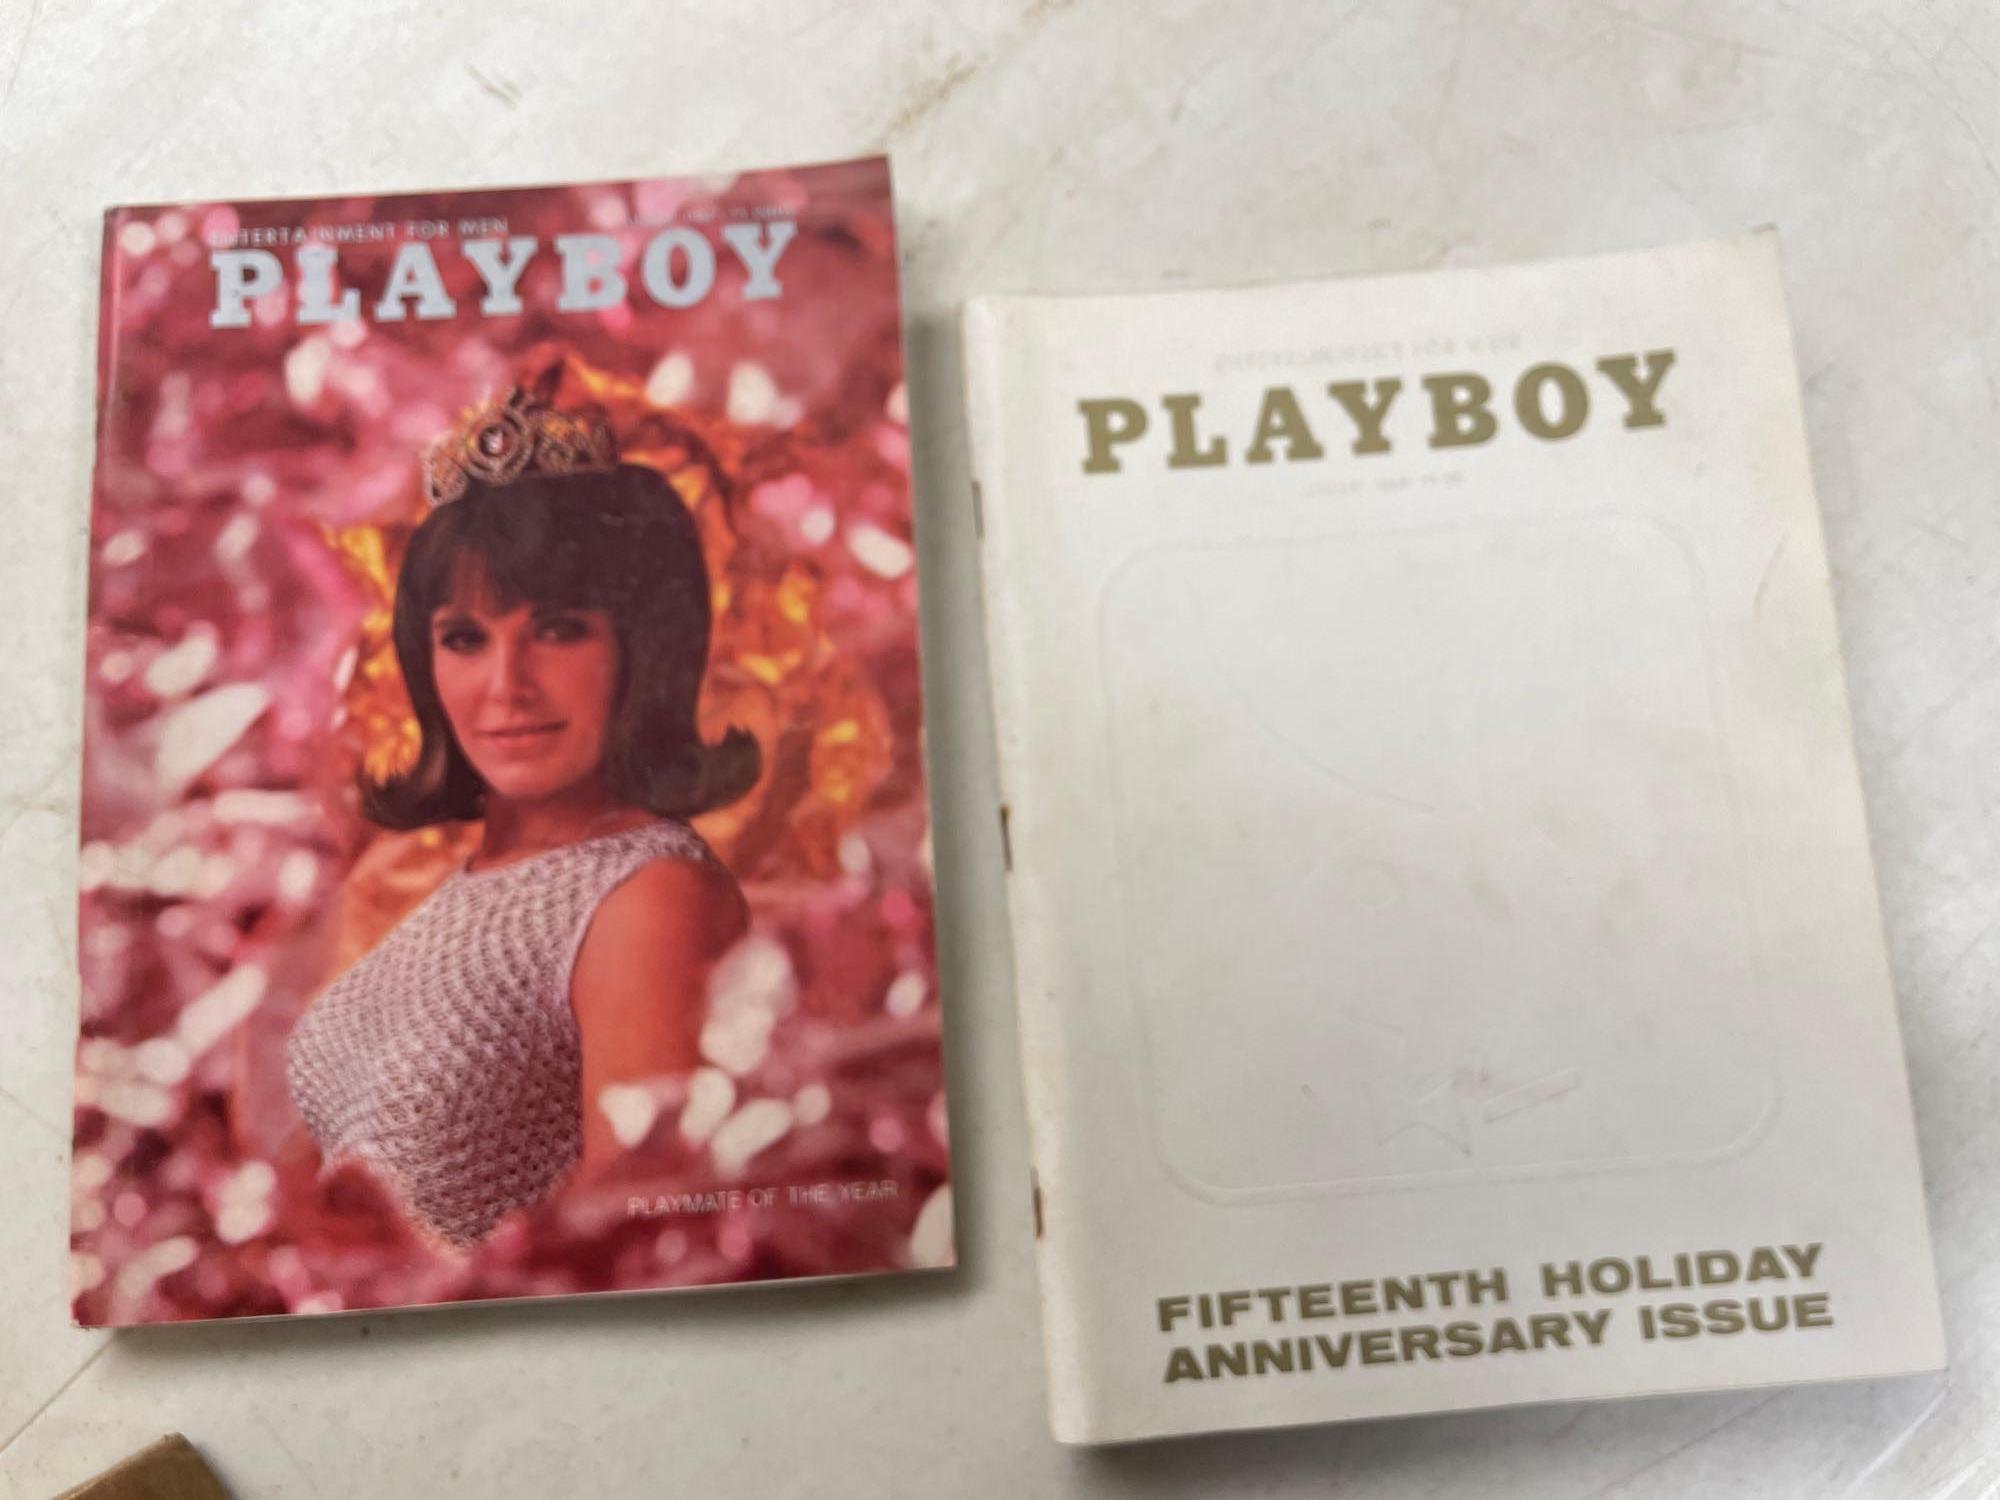 2-60's and 3-70's Playboy Magazines